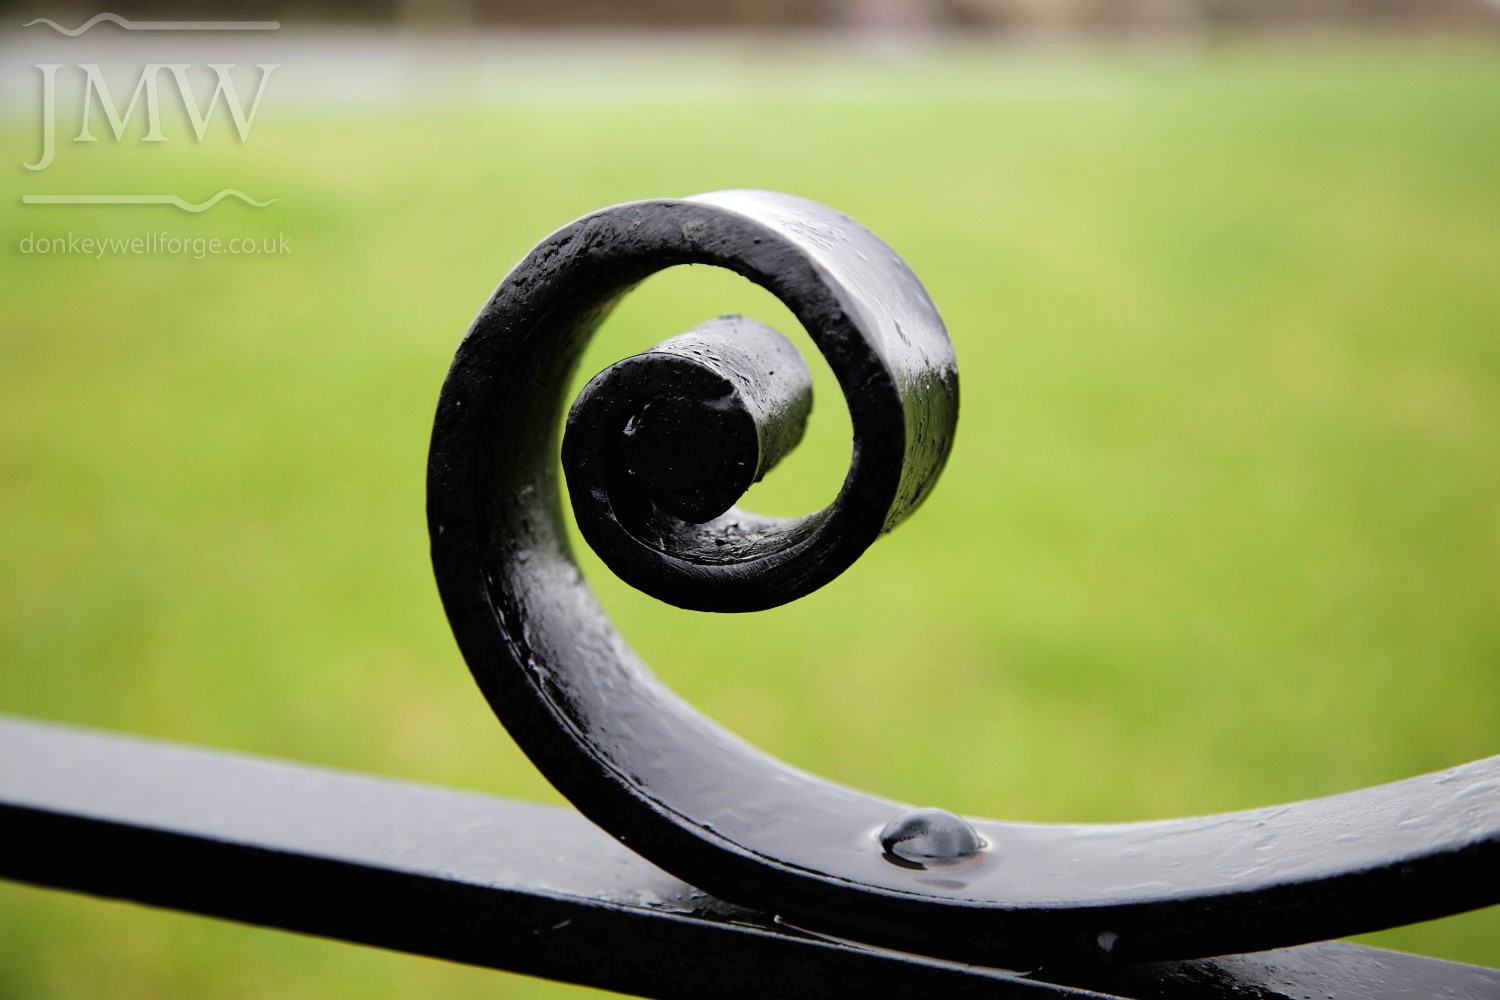 ornate-detail-scroll-church-ironwork-gates-cotswolds-donkeywell-forge-forged